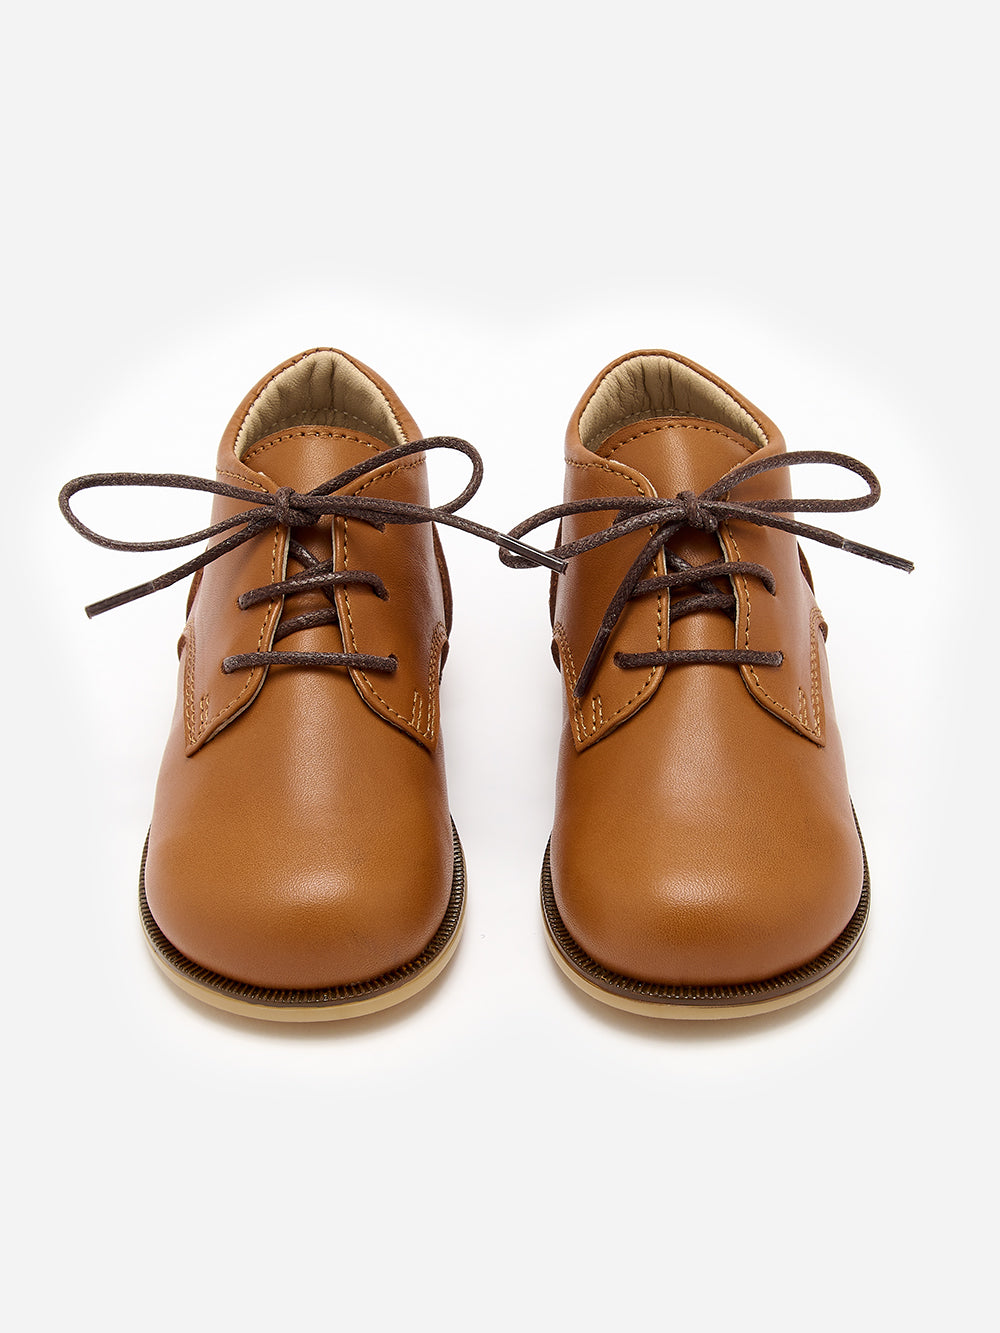 Load image into Gallery viewer, Brown Leather Toddler Boots
